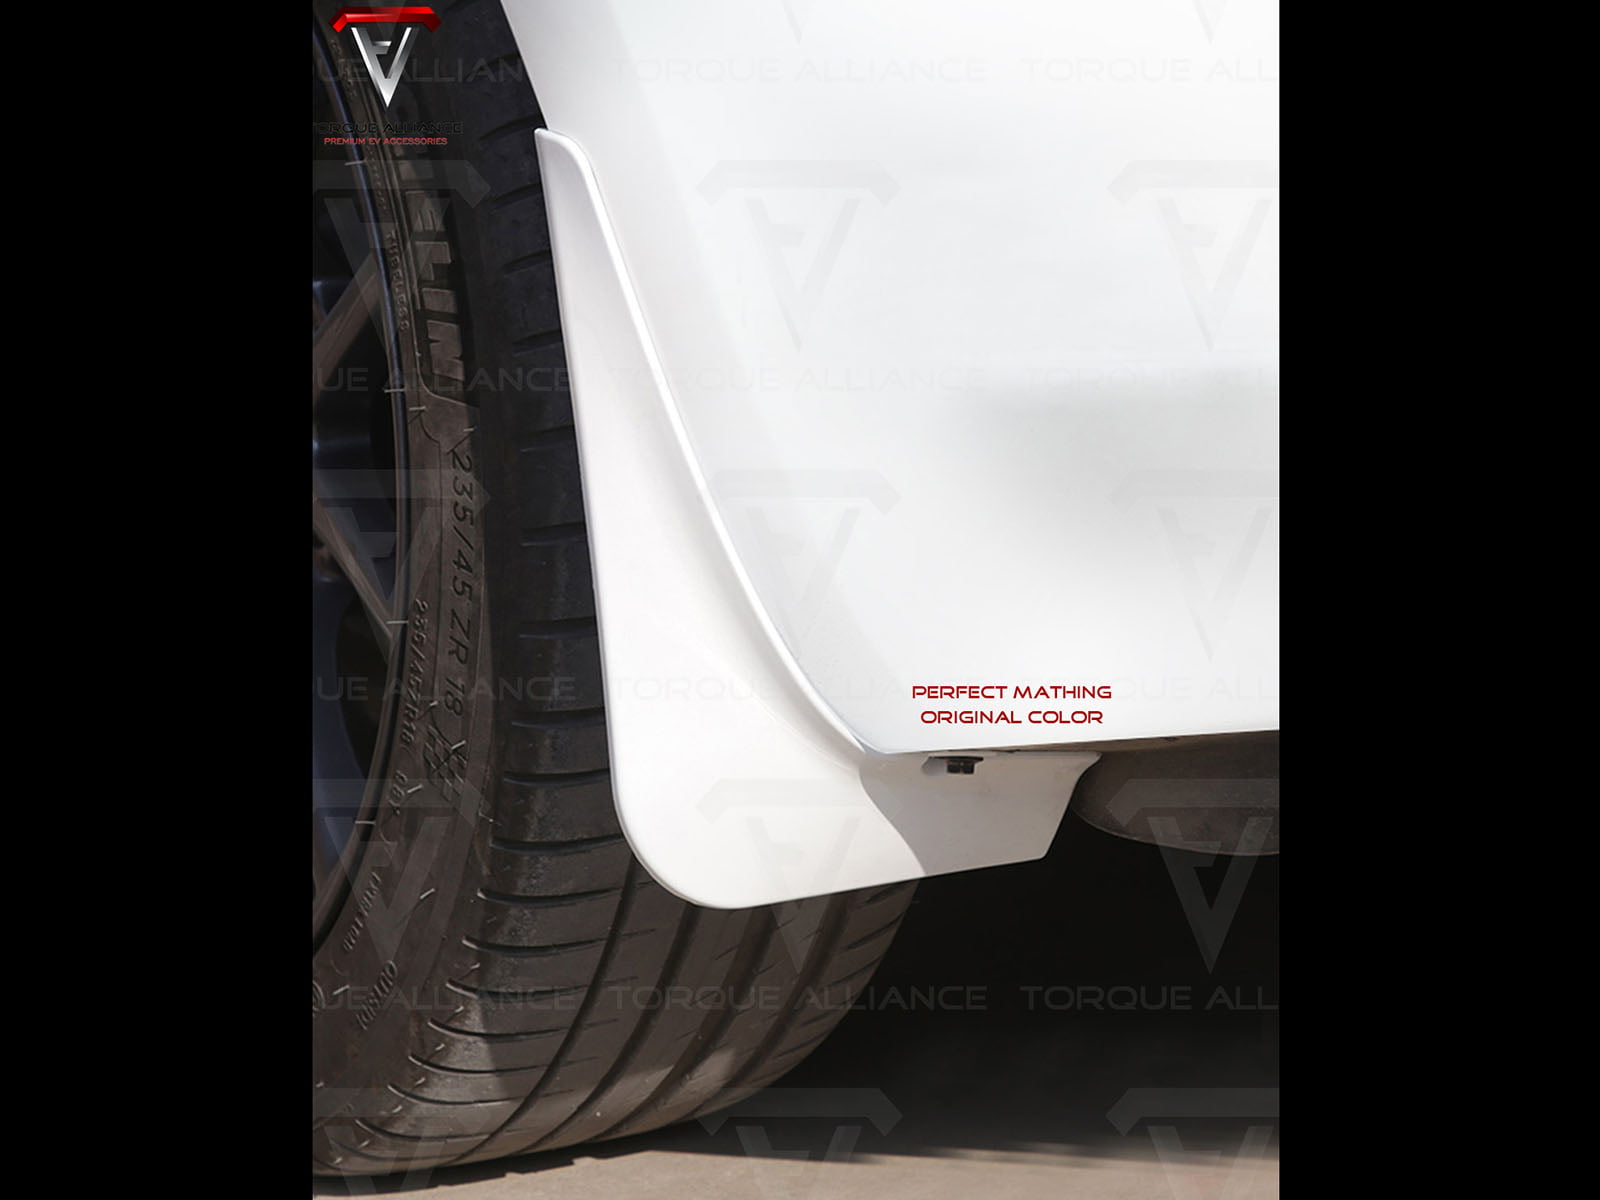 Tesla's offical front mud flaps are worth it!